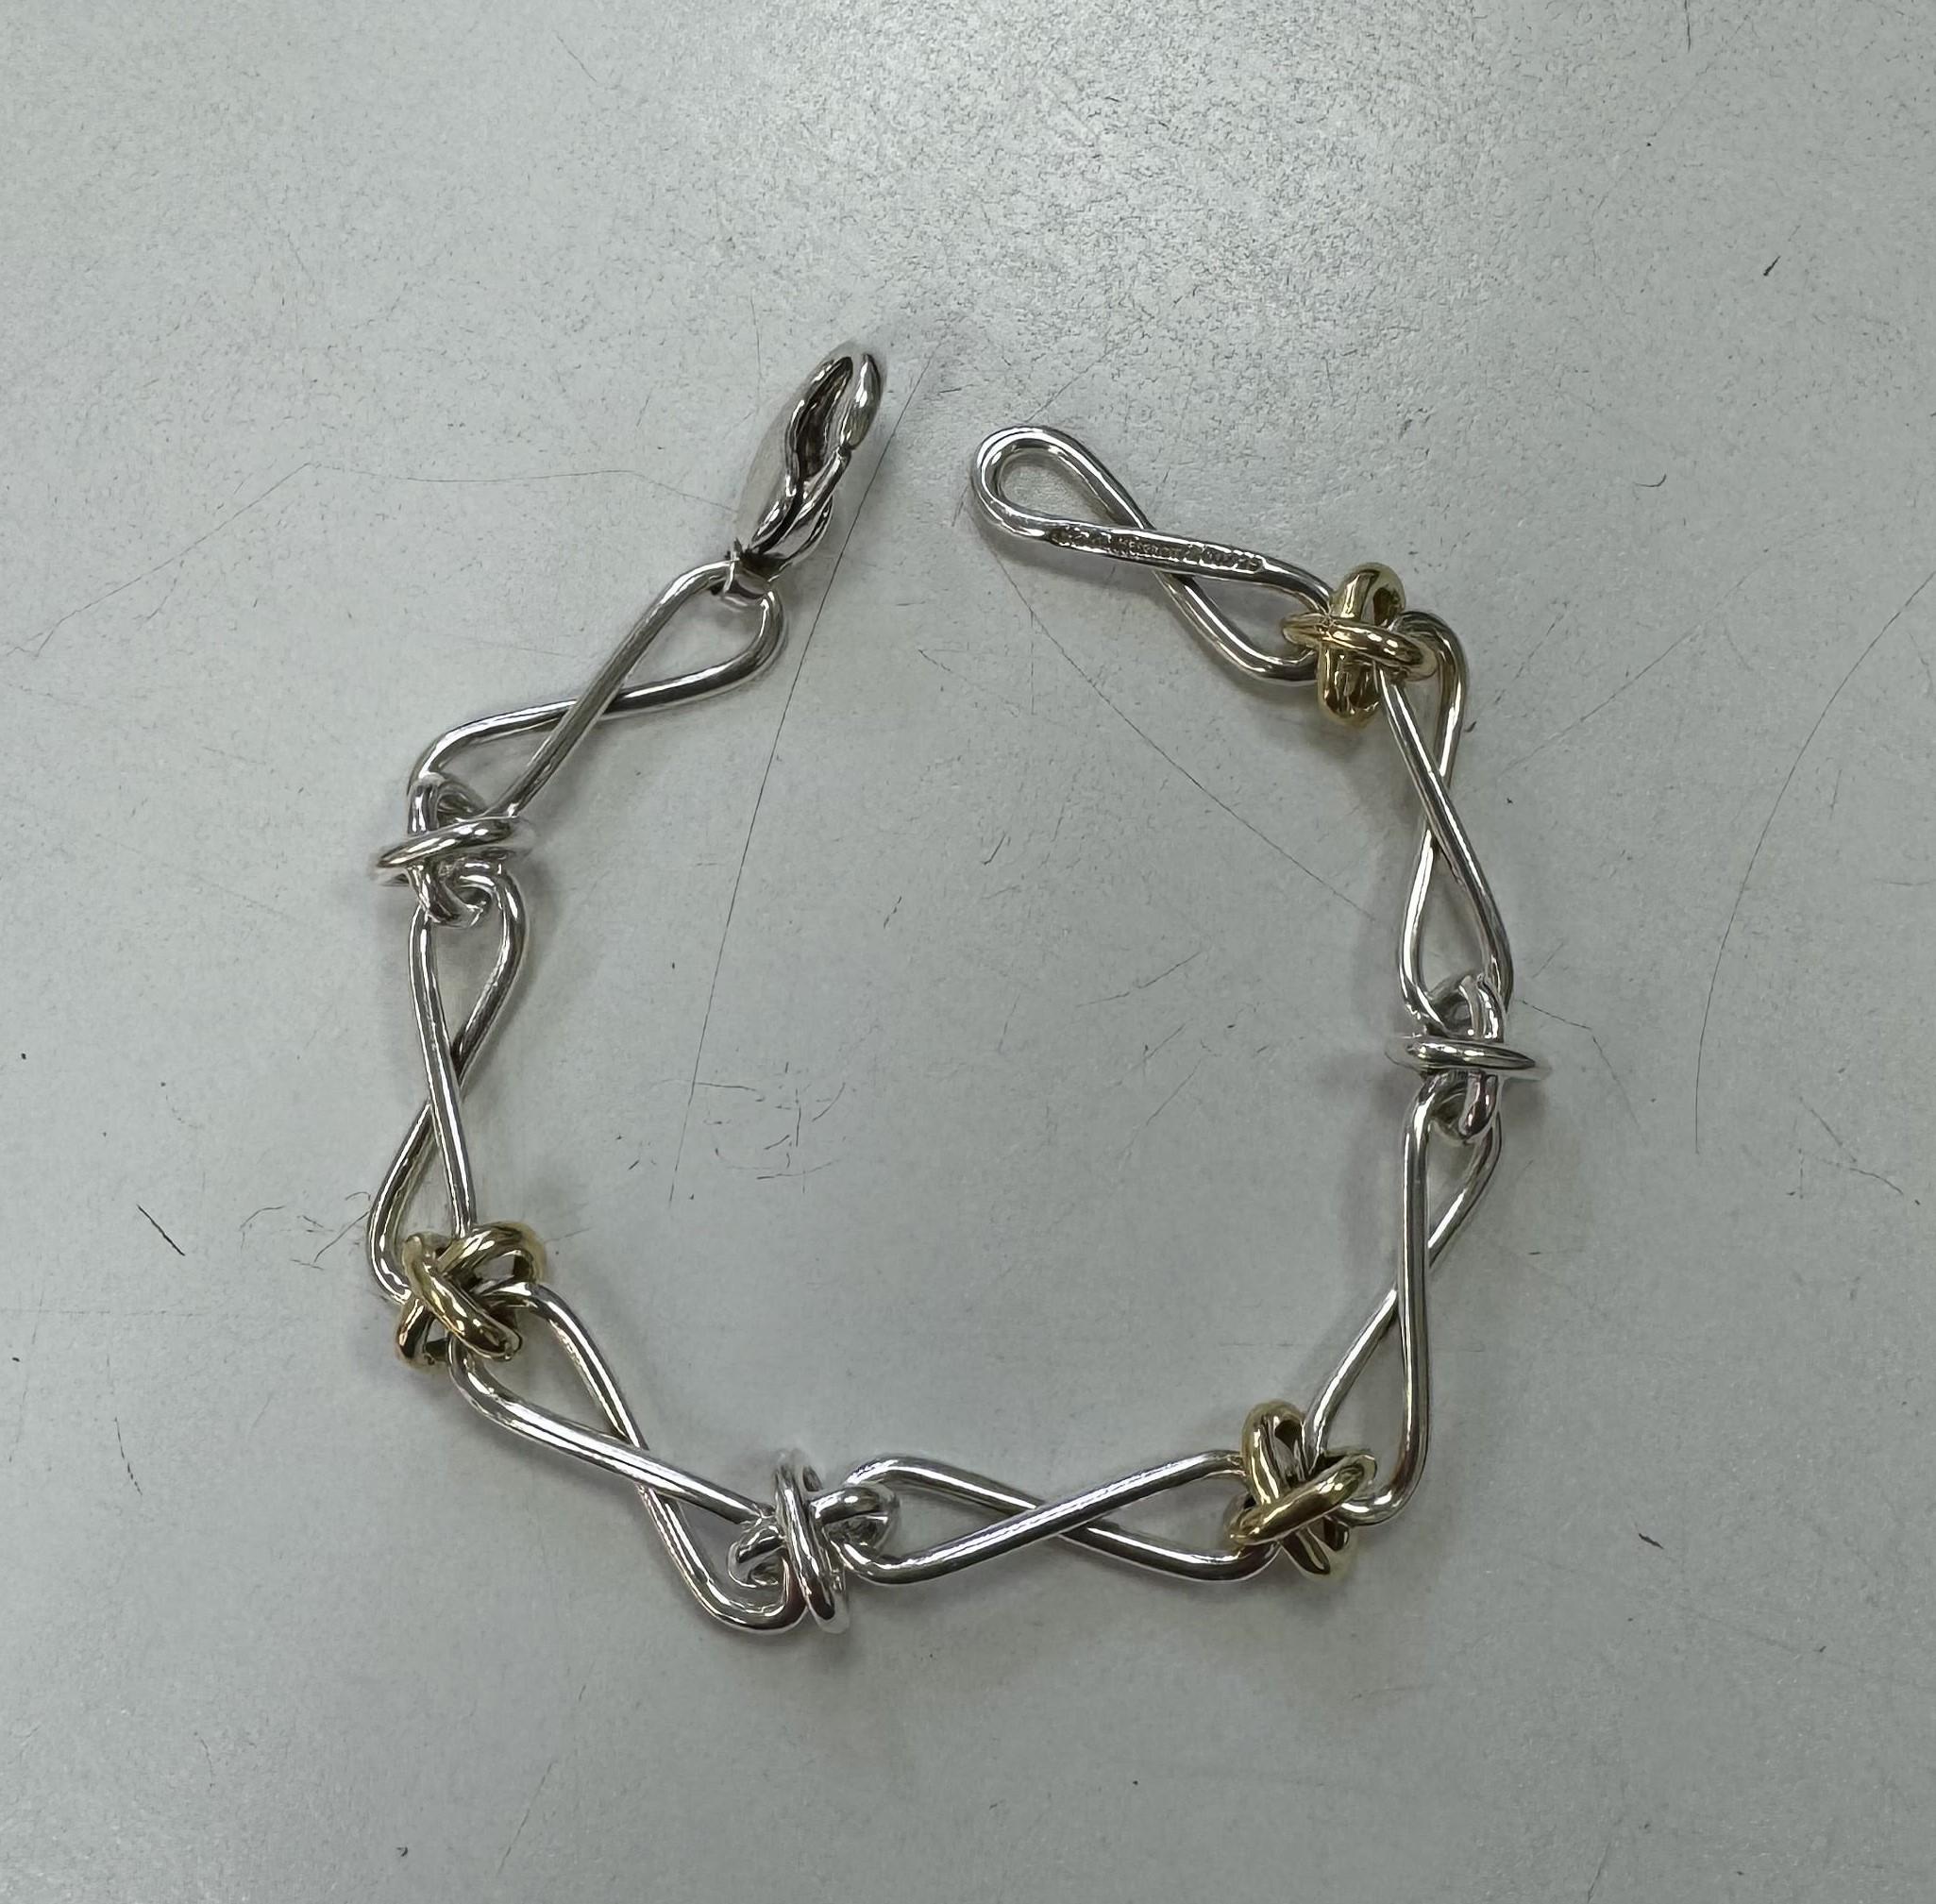 Item specifics
Condition Pre-owned: An item that has been used or worn previously. See the seller’s listing for full details  
Brand Tiffany & Co.
Type Bracelet
Metal Purity 18k
Style Link
Base Metal Sterling Silver, 925 parts per 1000
Metal